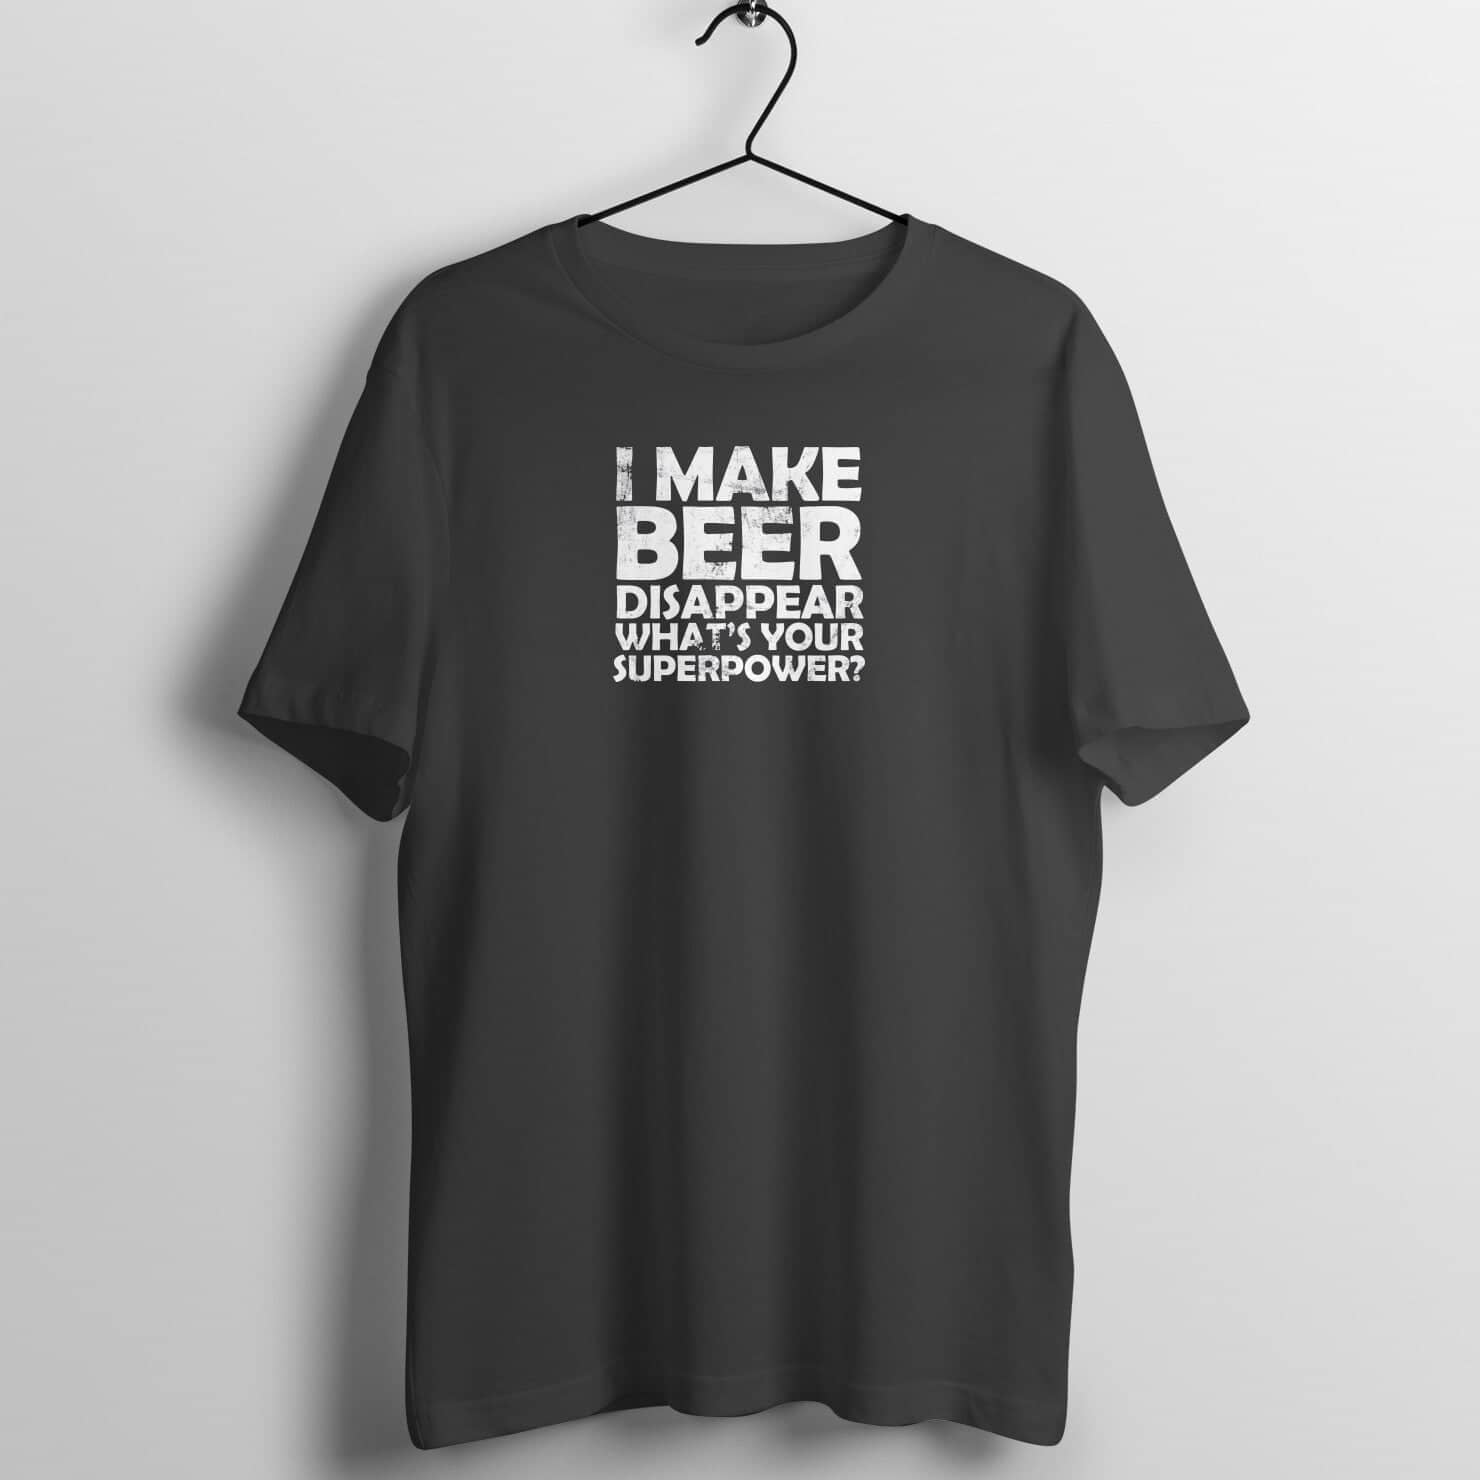 I Make Beer Disappear Funny Black T Shirt for Men and Women Printrove Black S 